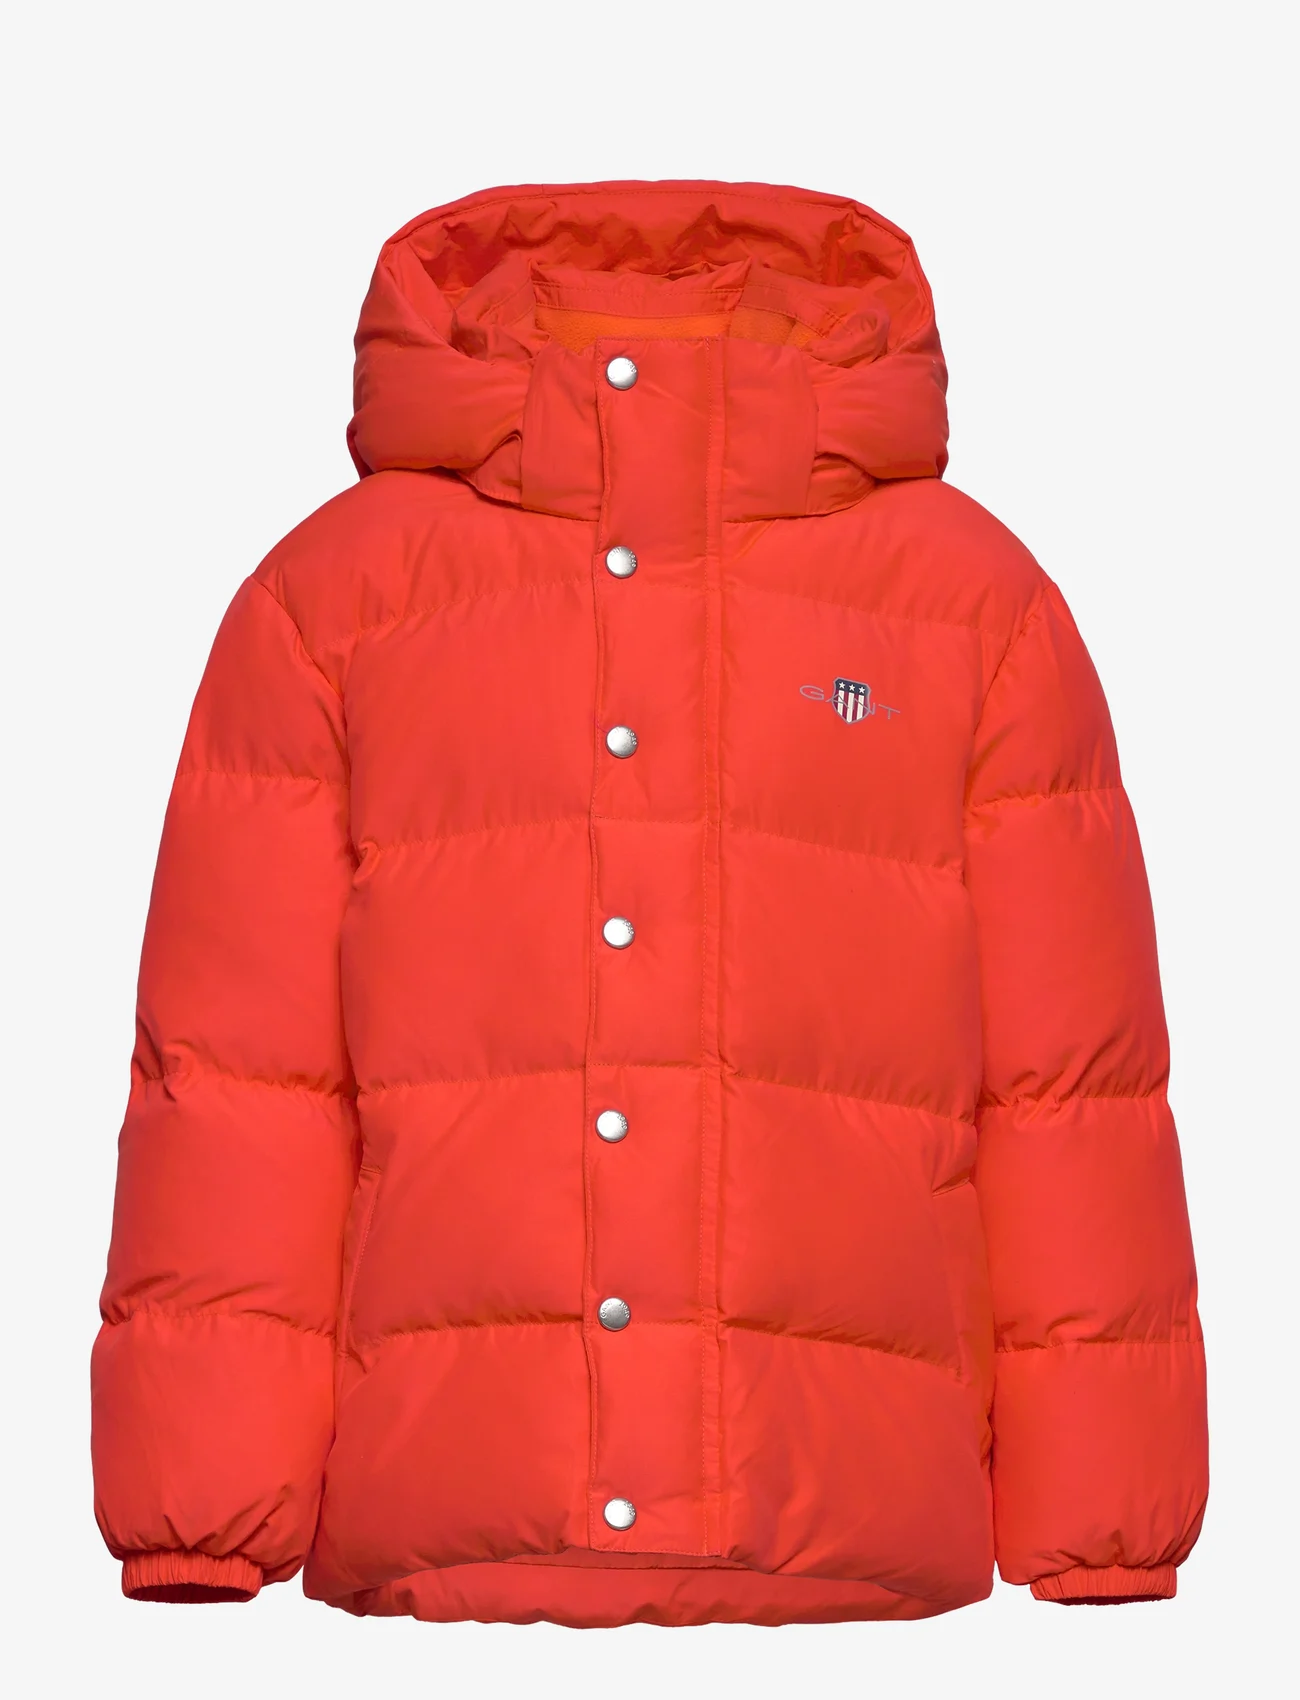 GANT - RELAXED PUFFER JACKET - untuva- & toppatakit - tomato red - 0